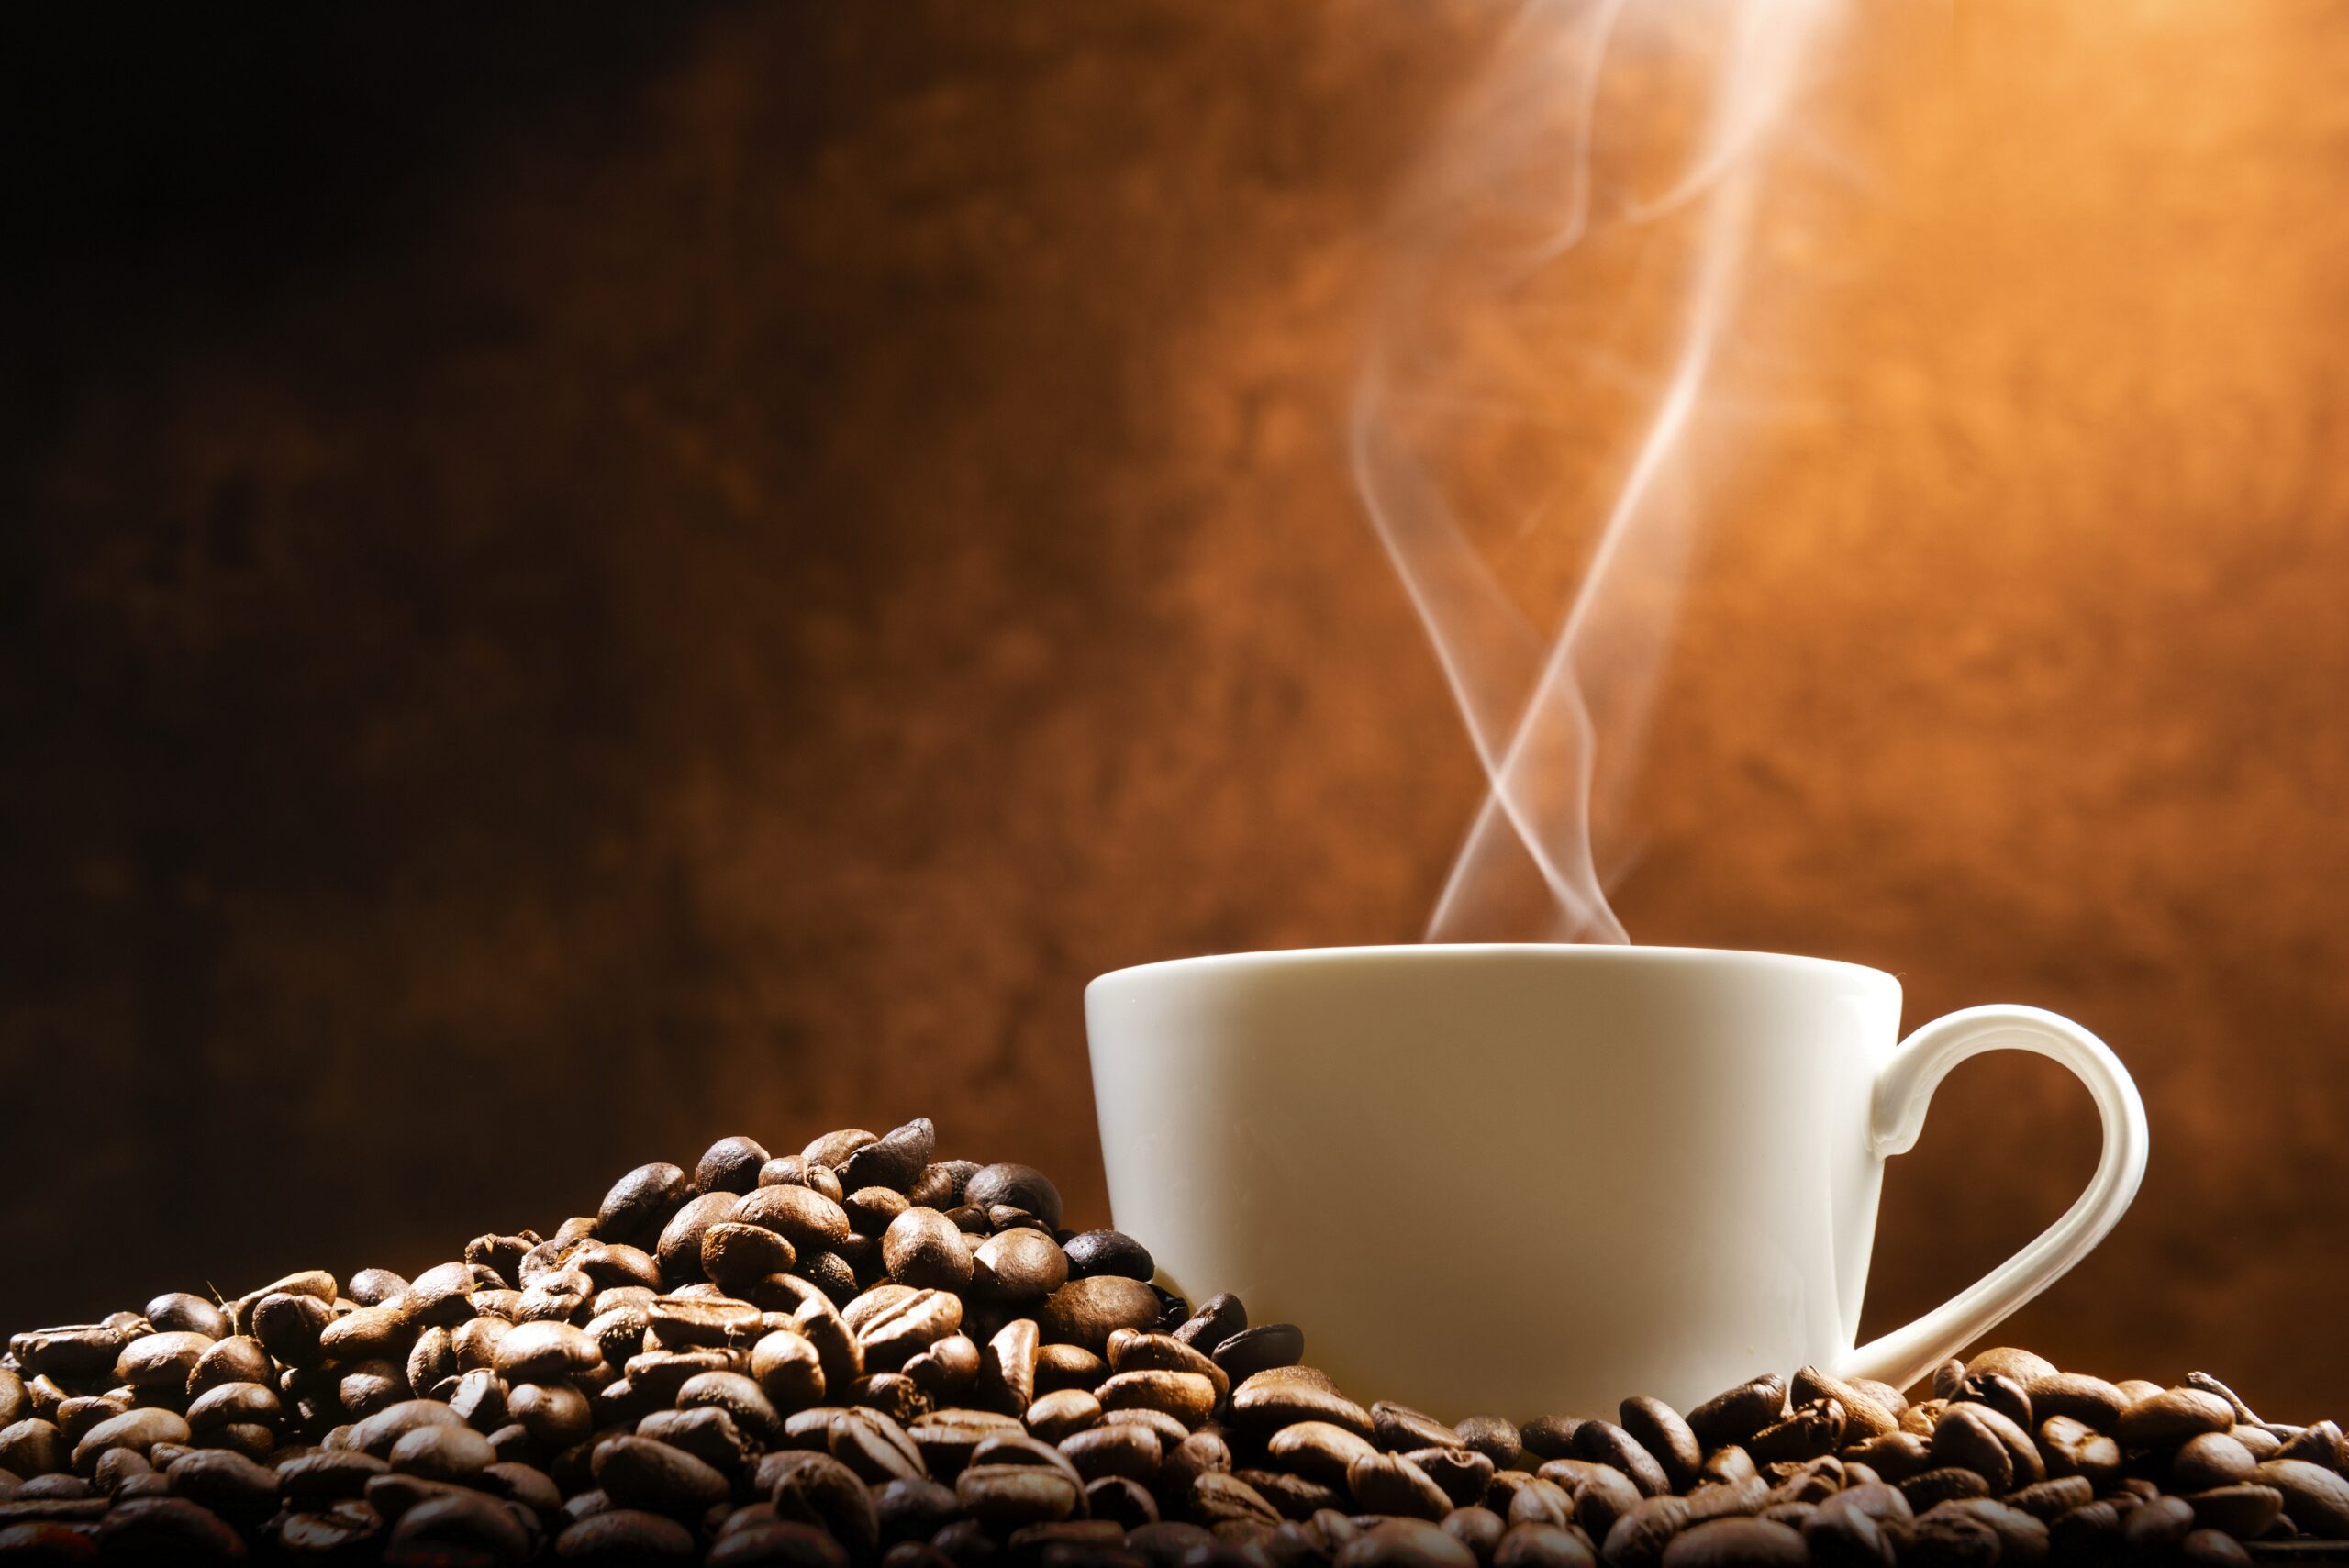 Diabetes: Coffee supports remission of prediabetes